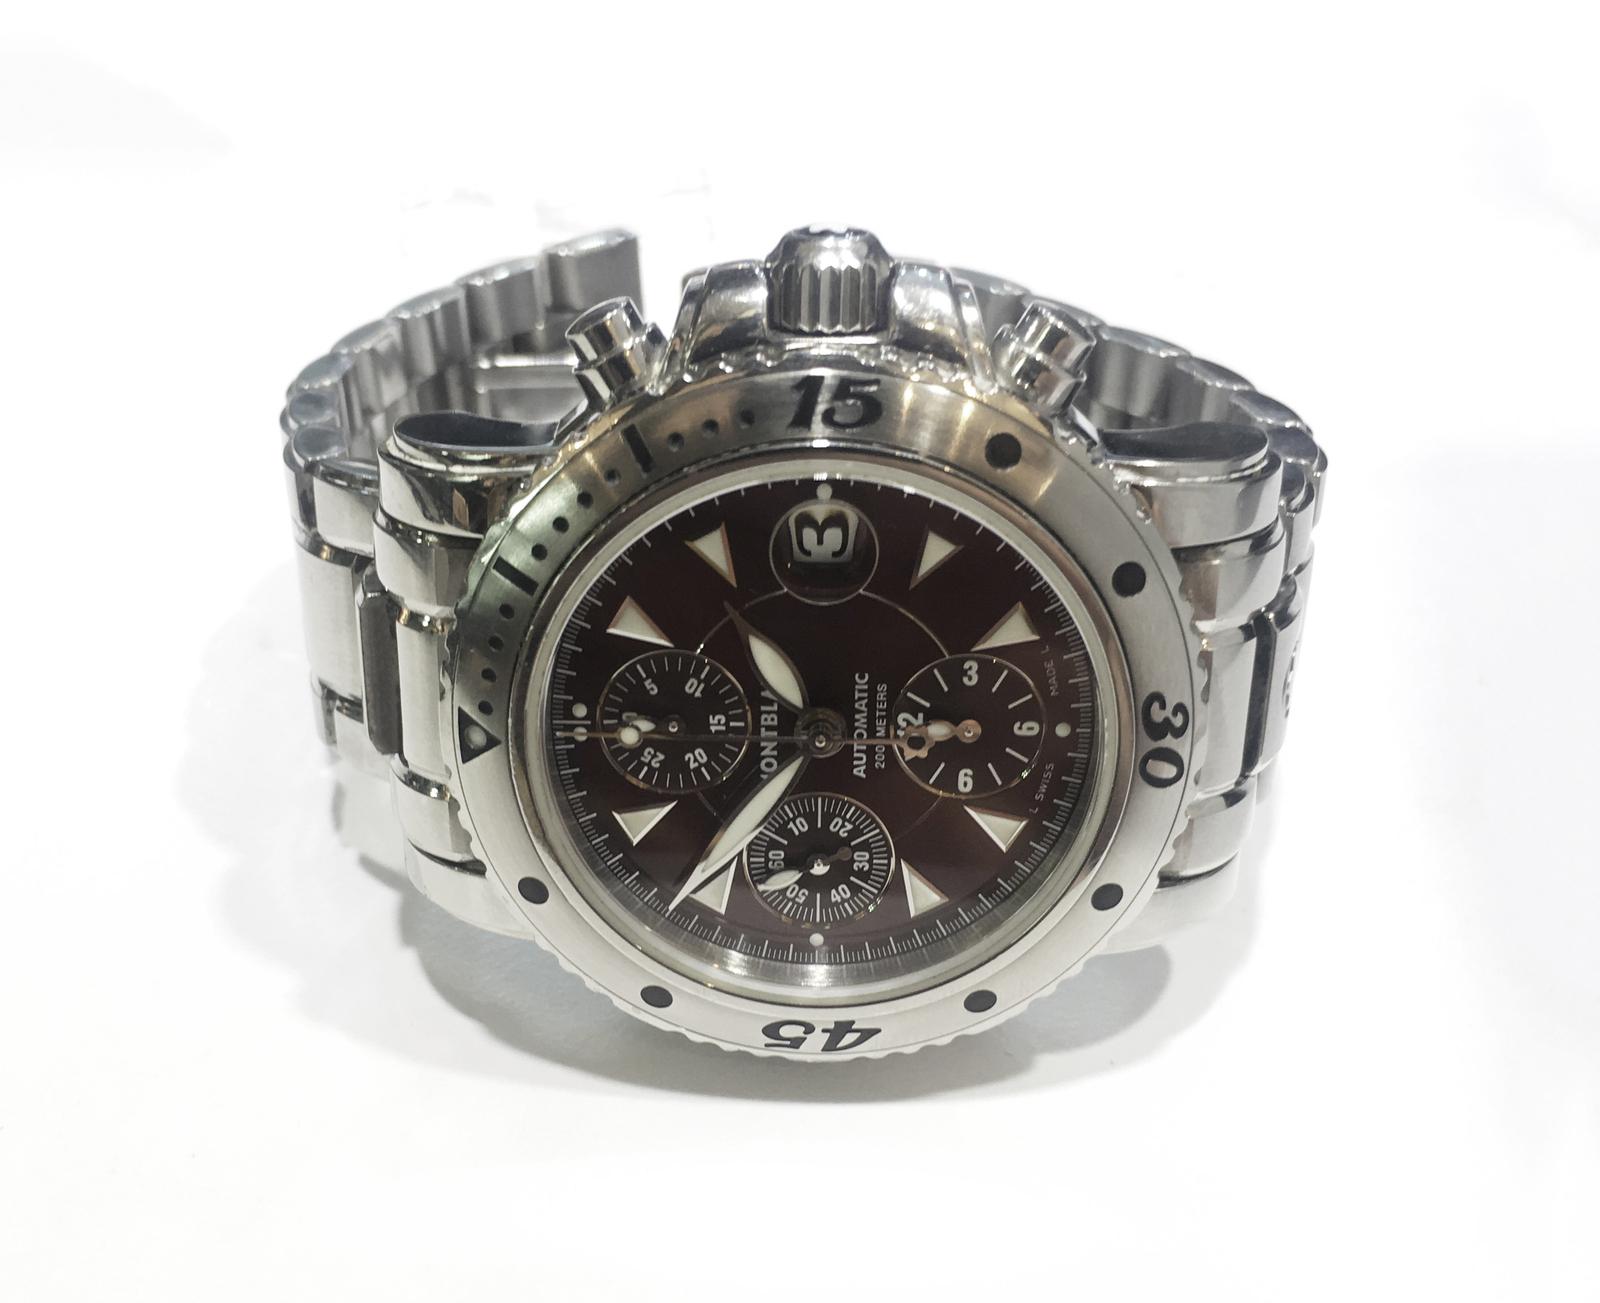 -Condition: Mint
-Case size: 41mm
-Material: Stainless steel
-Movement: Automatic
-Screw-down fluted stainless steel crown
-Rotating steel bezel
-Brown Dial
-Date displayed at 3 o'clock
-Hidden double deployment buckle
-Feature: Chronograph
-Water